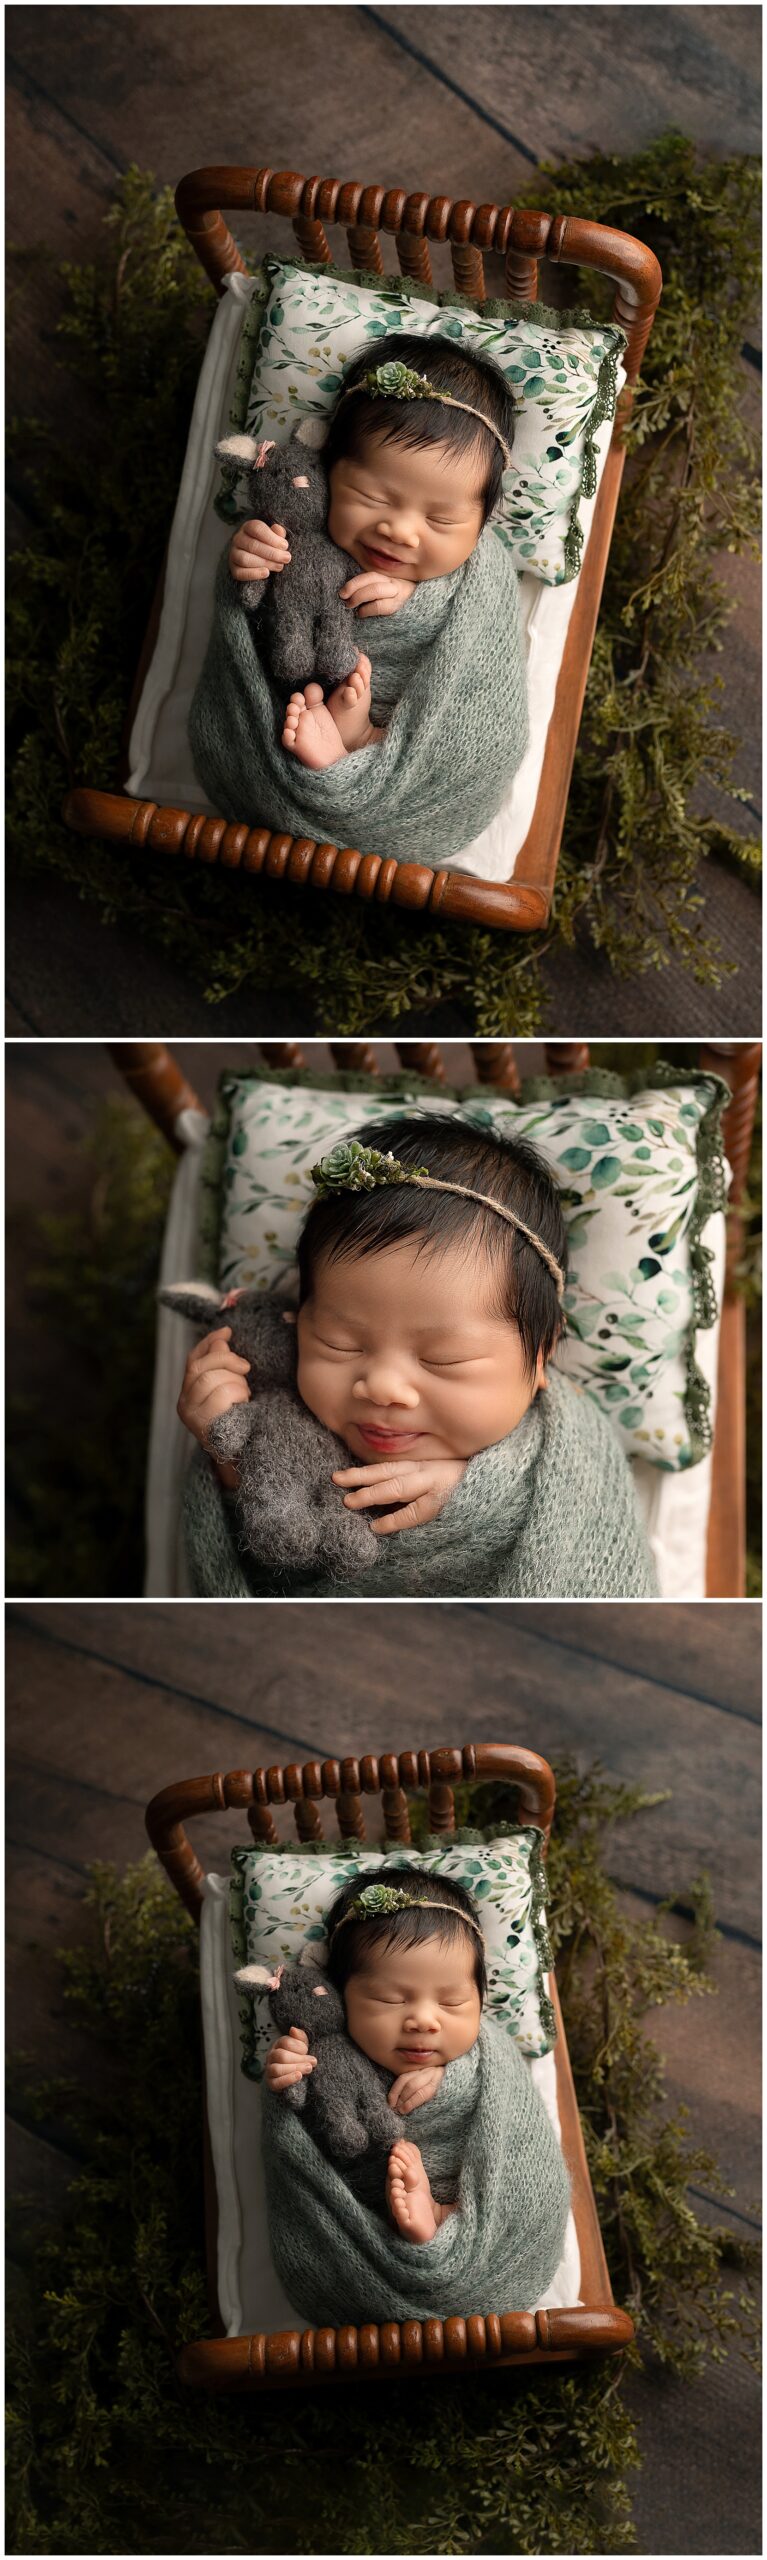 A set of three photos of a newborn on a prop bed, swaddled in a green blanket clutching a little stuffed bunny.